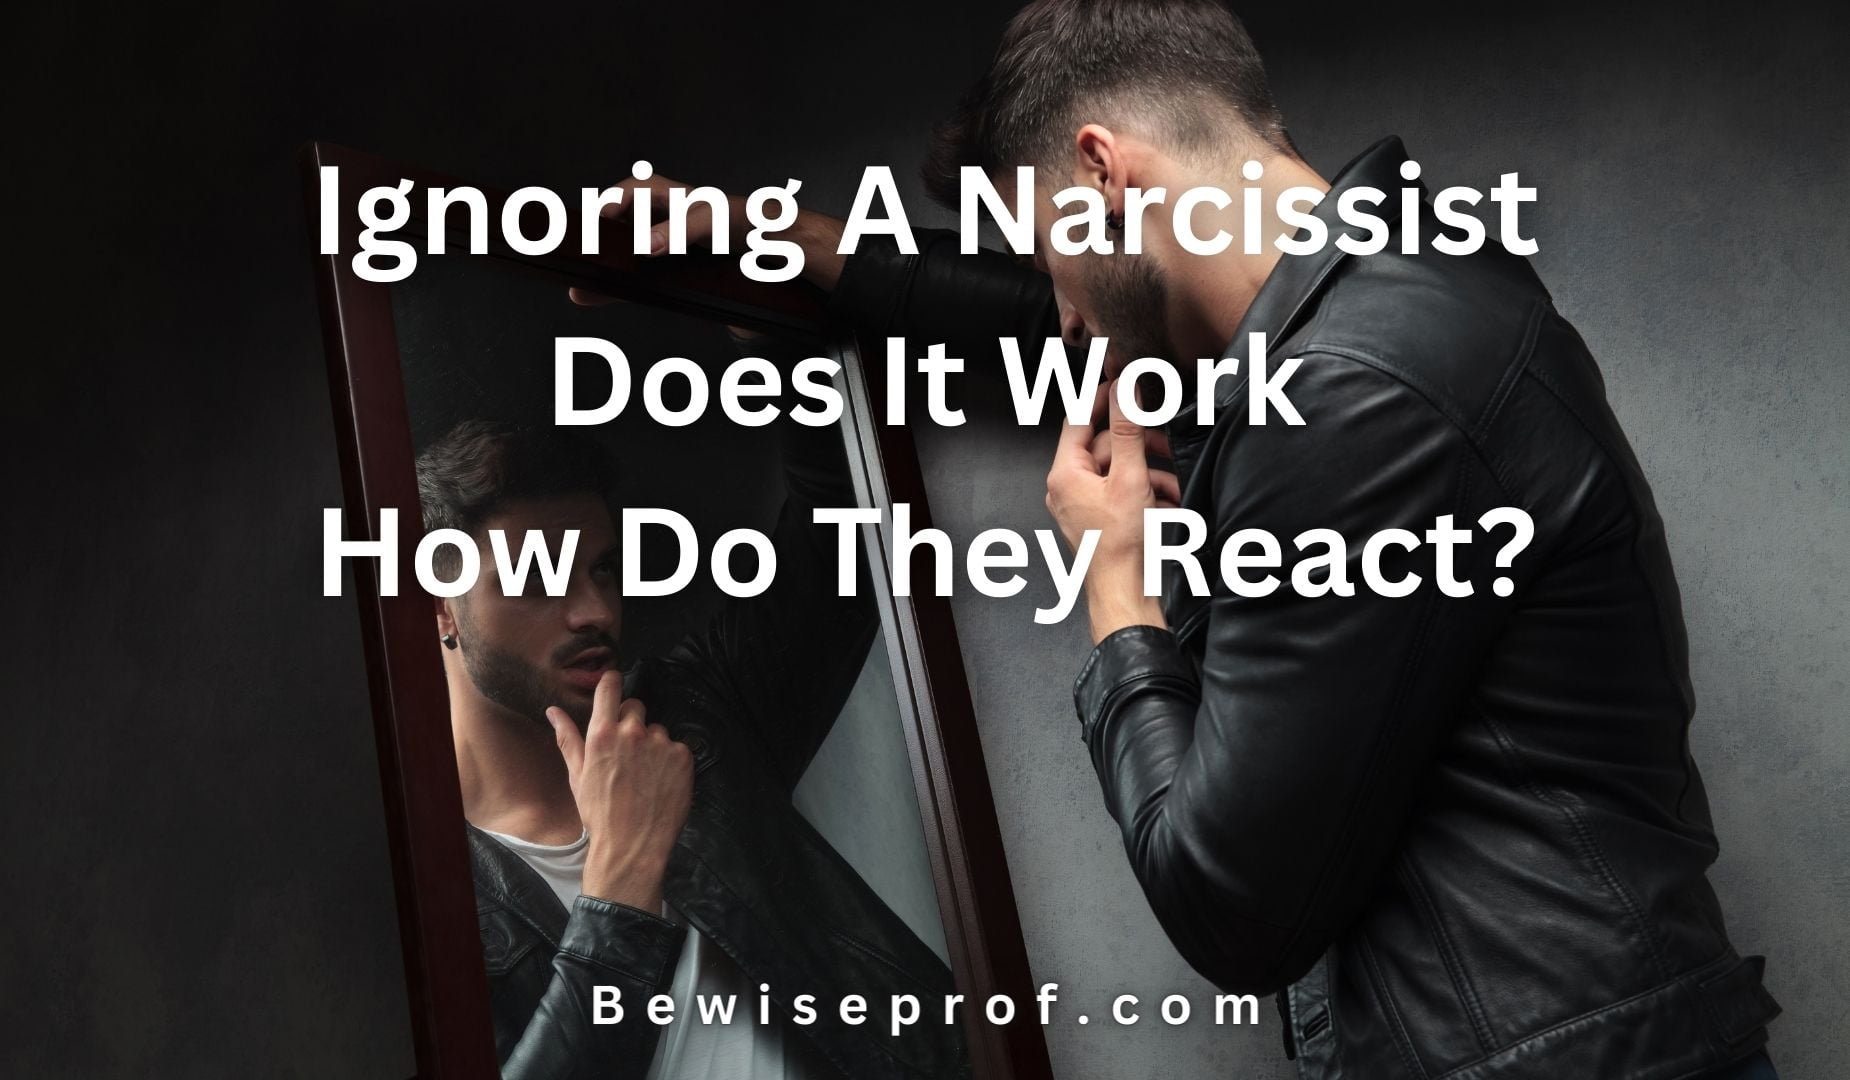 Ignoring A Narcissist: Does It Work & How Do They React?